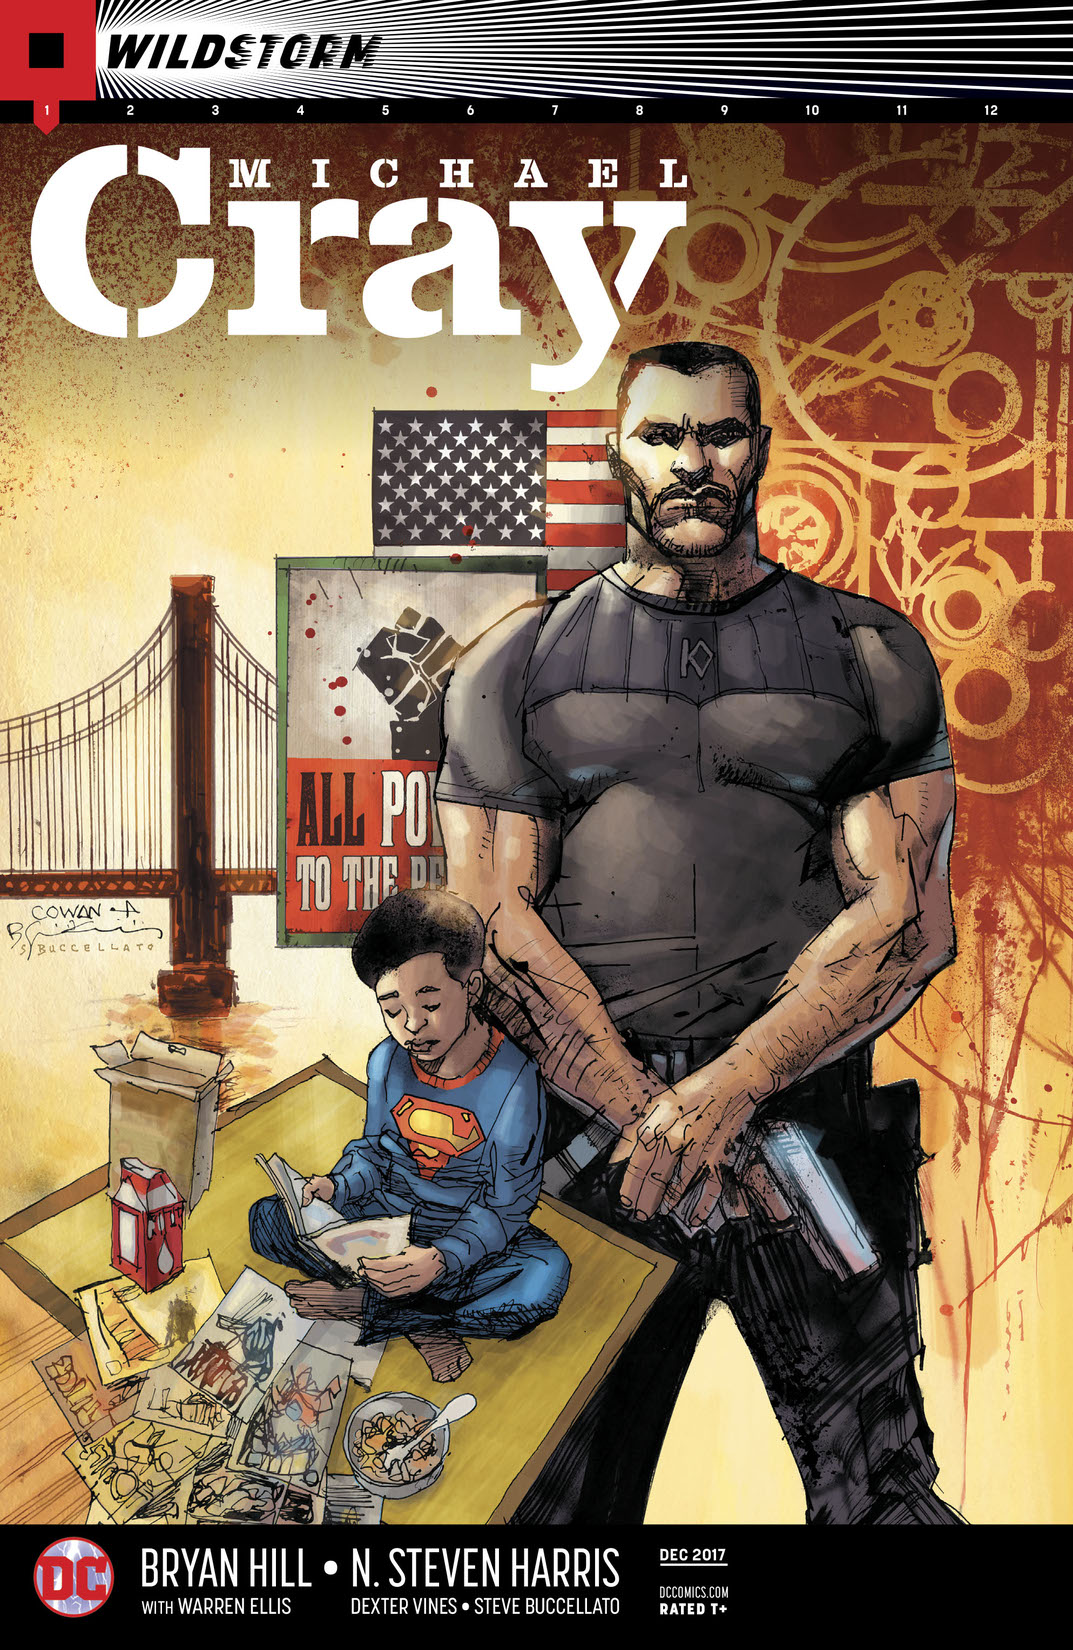 The Wild Storm: Michael Cray #1 preview images